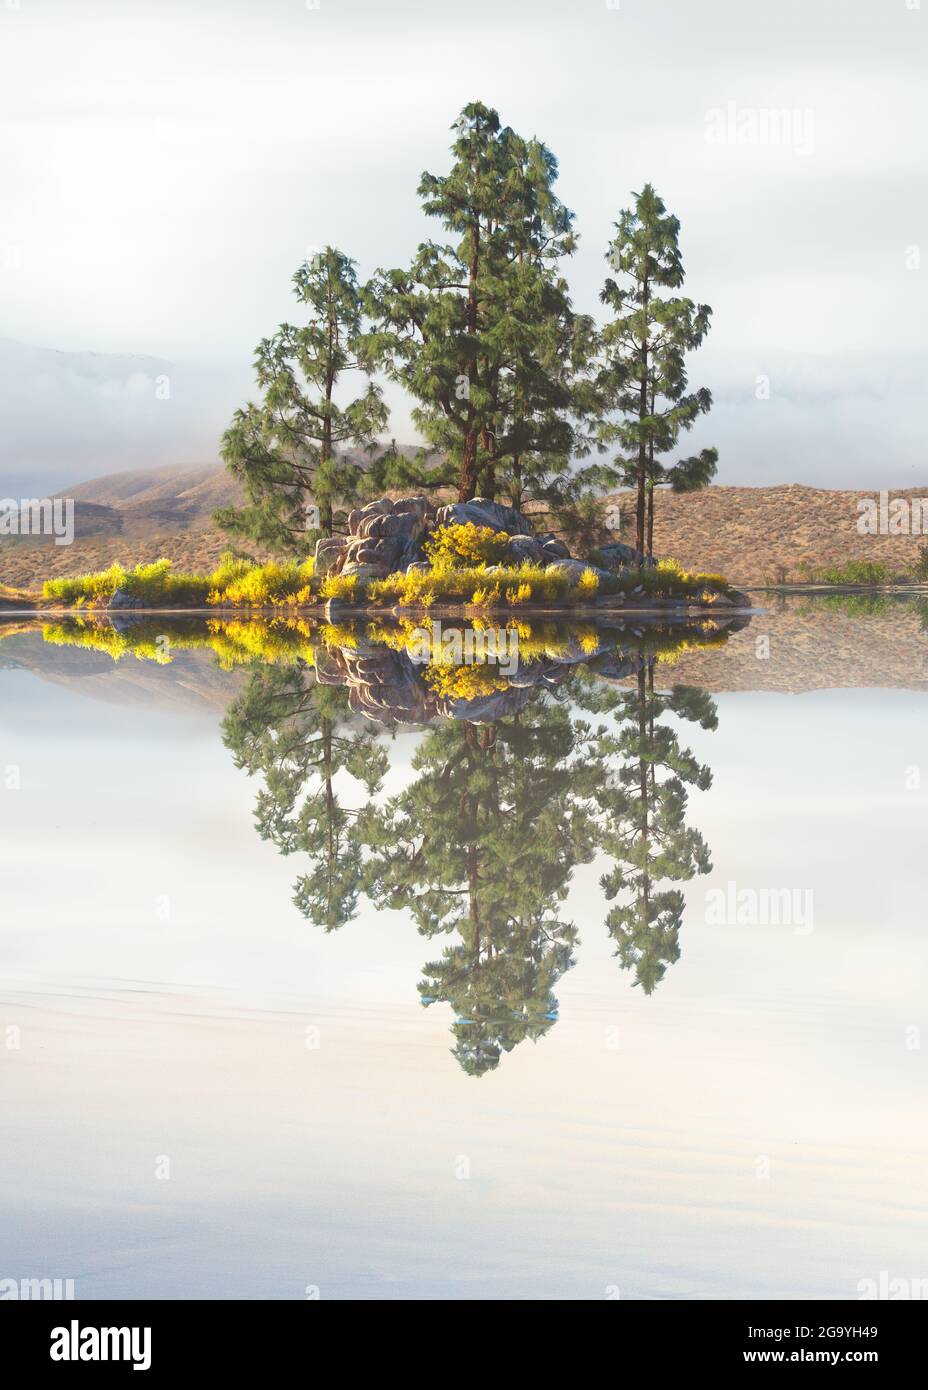 Pine trees on a rocky outcrop in a lake, California, USA Stock Photo